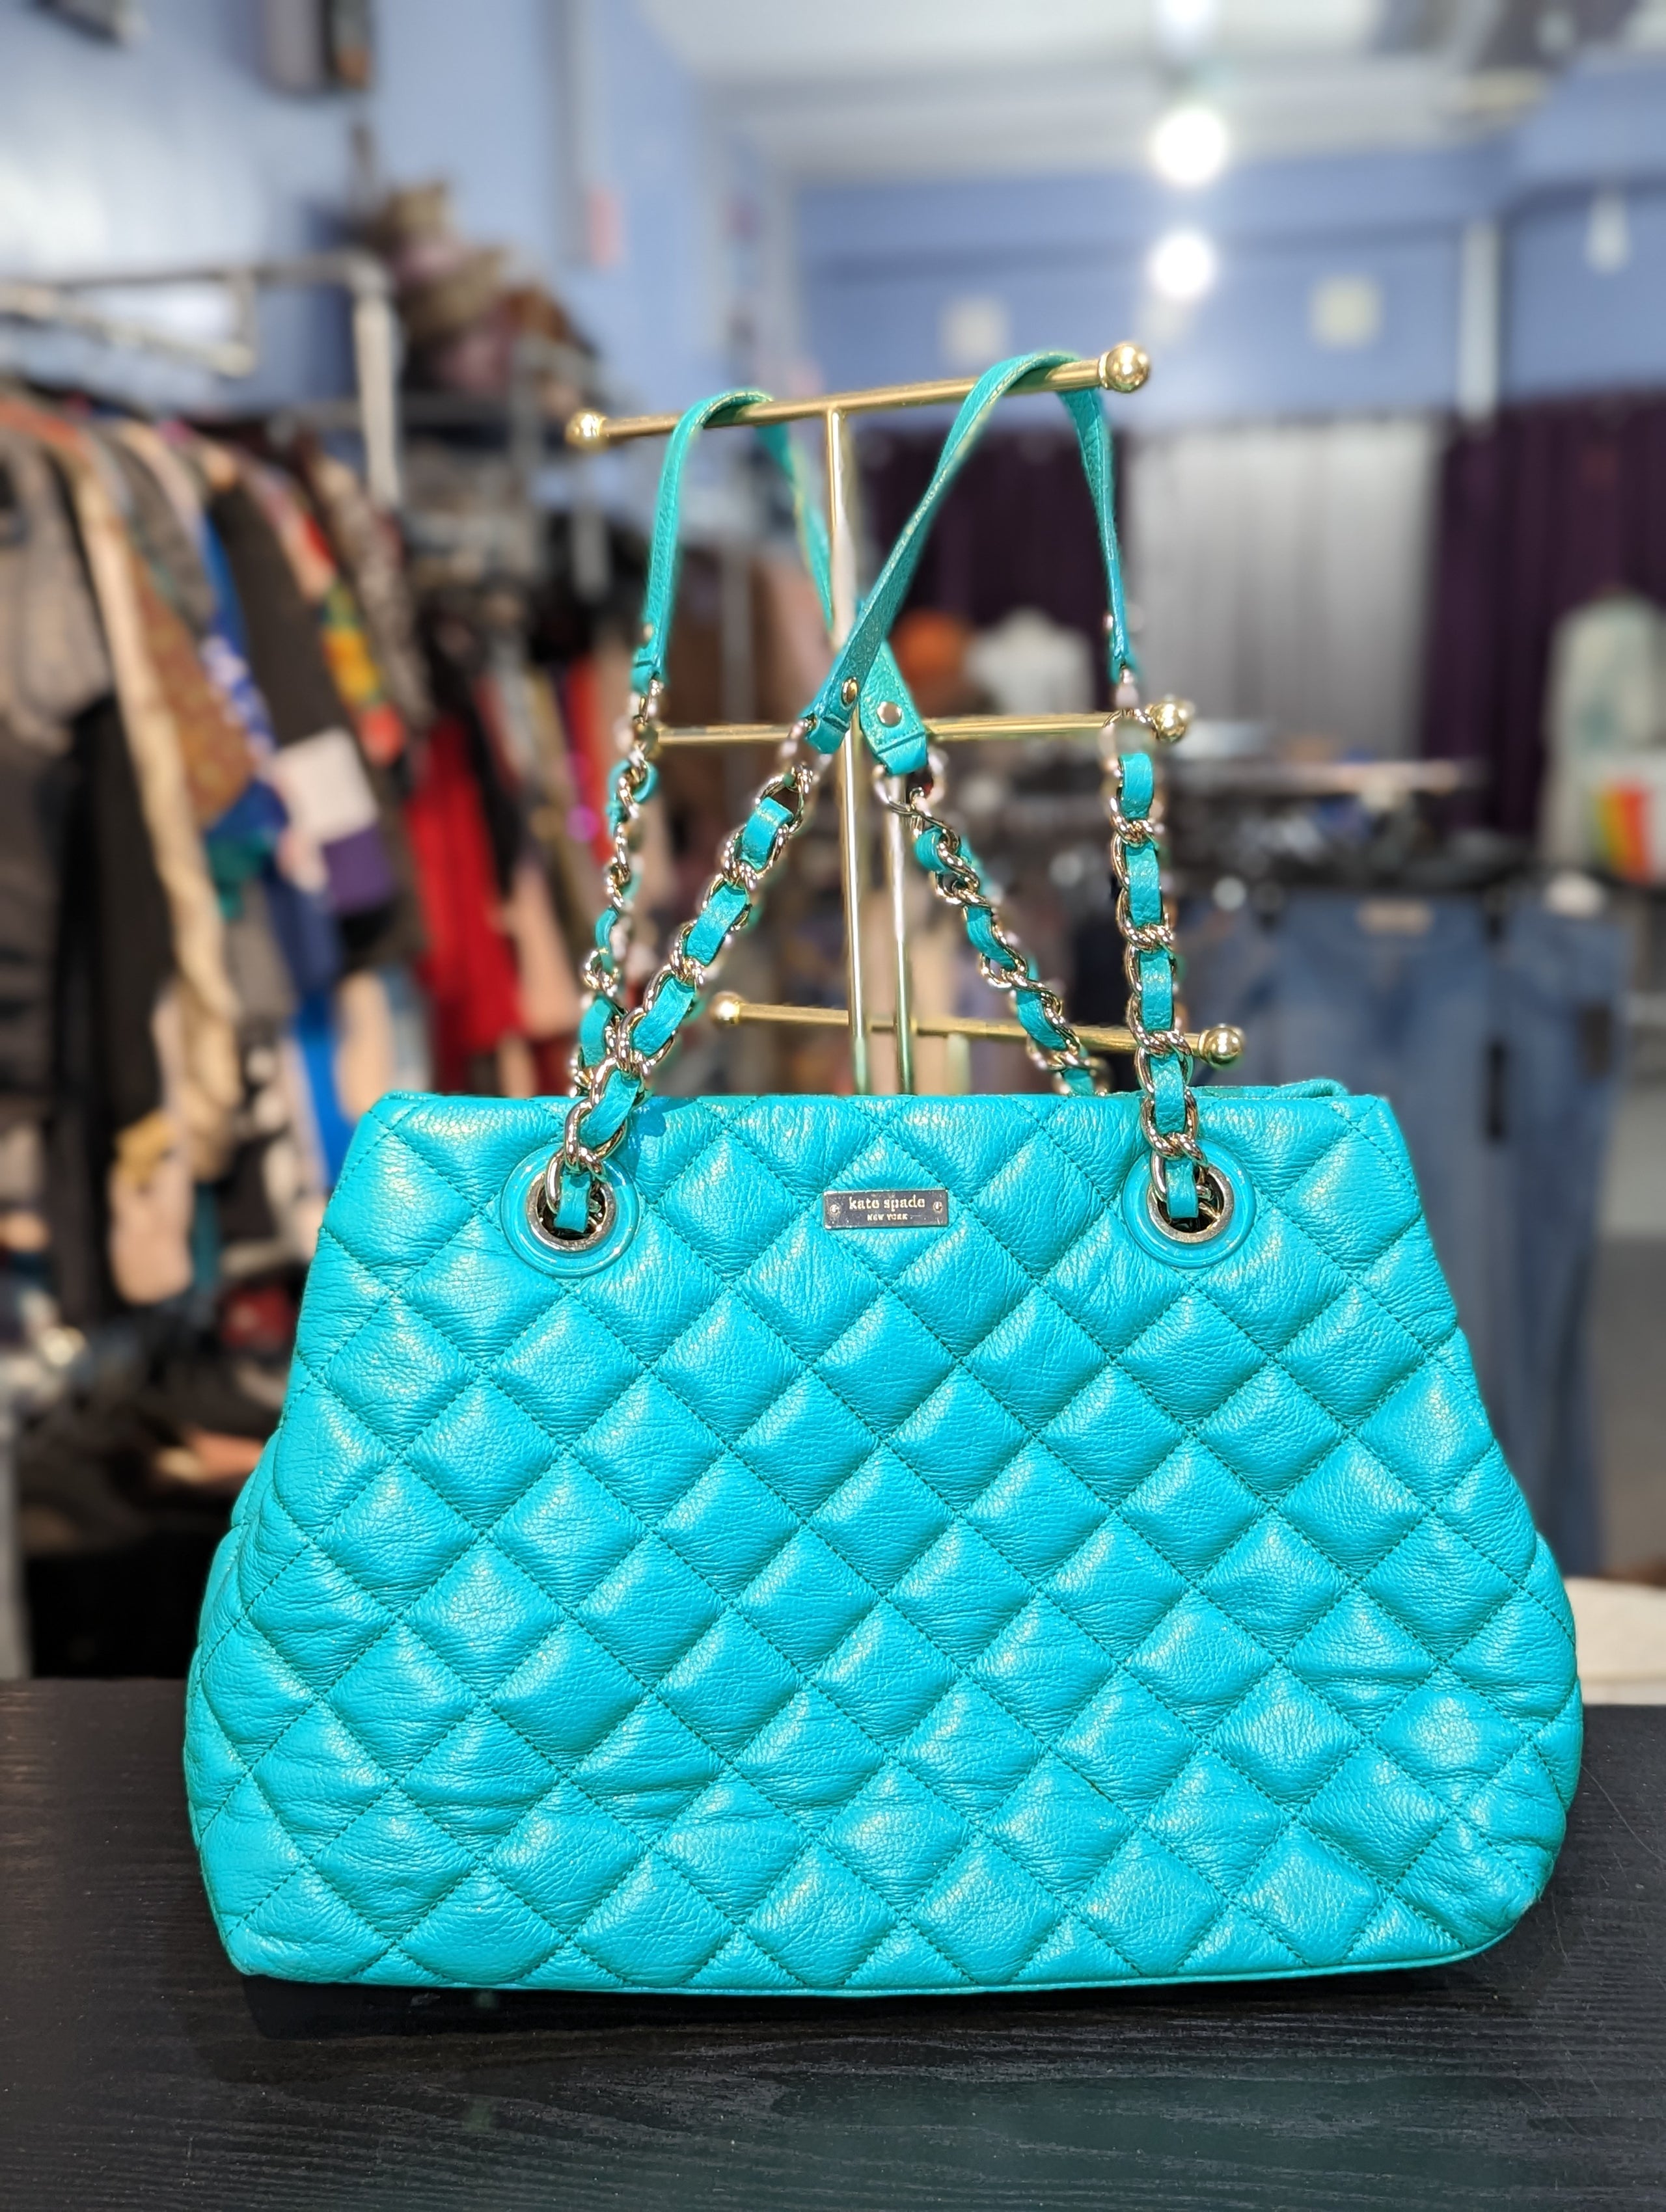 Kate Spade Teal Quilted Tote Purse